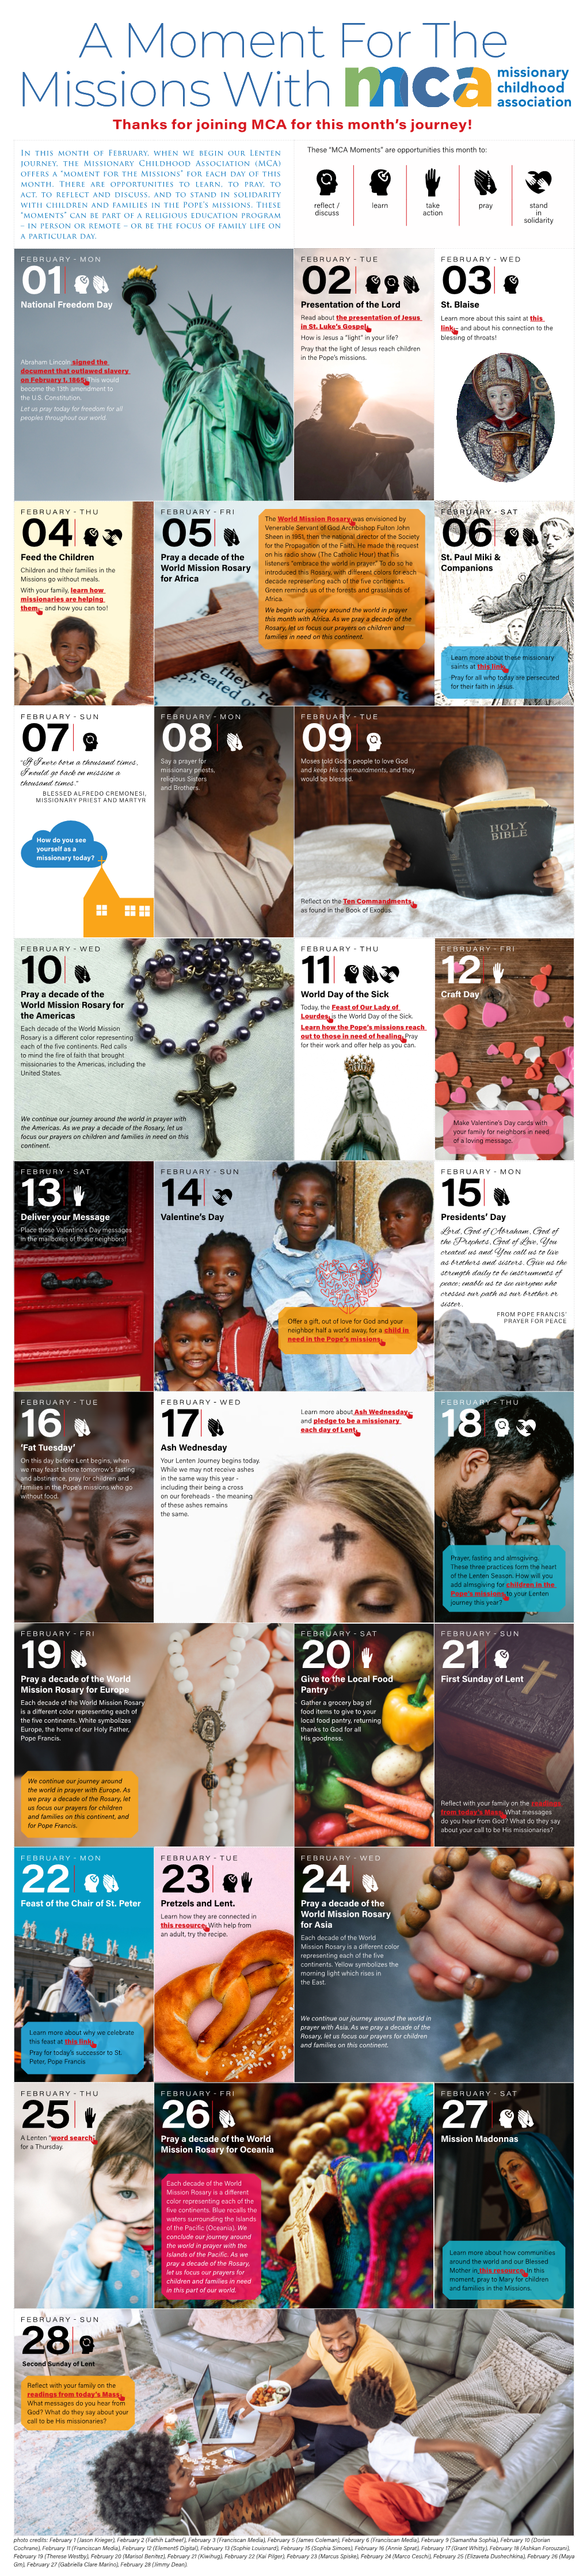 Missionary Childhood Association (MCA) Offers a “Moment for the Missions” for Each Day of This Month